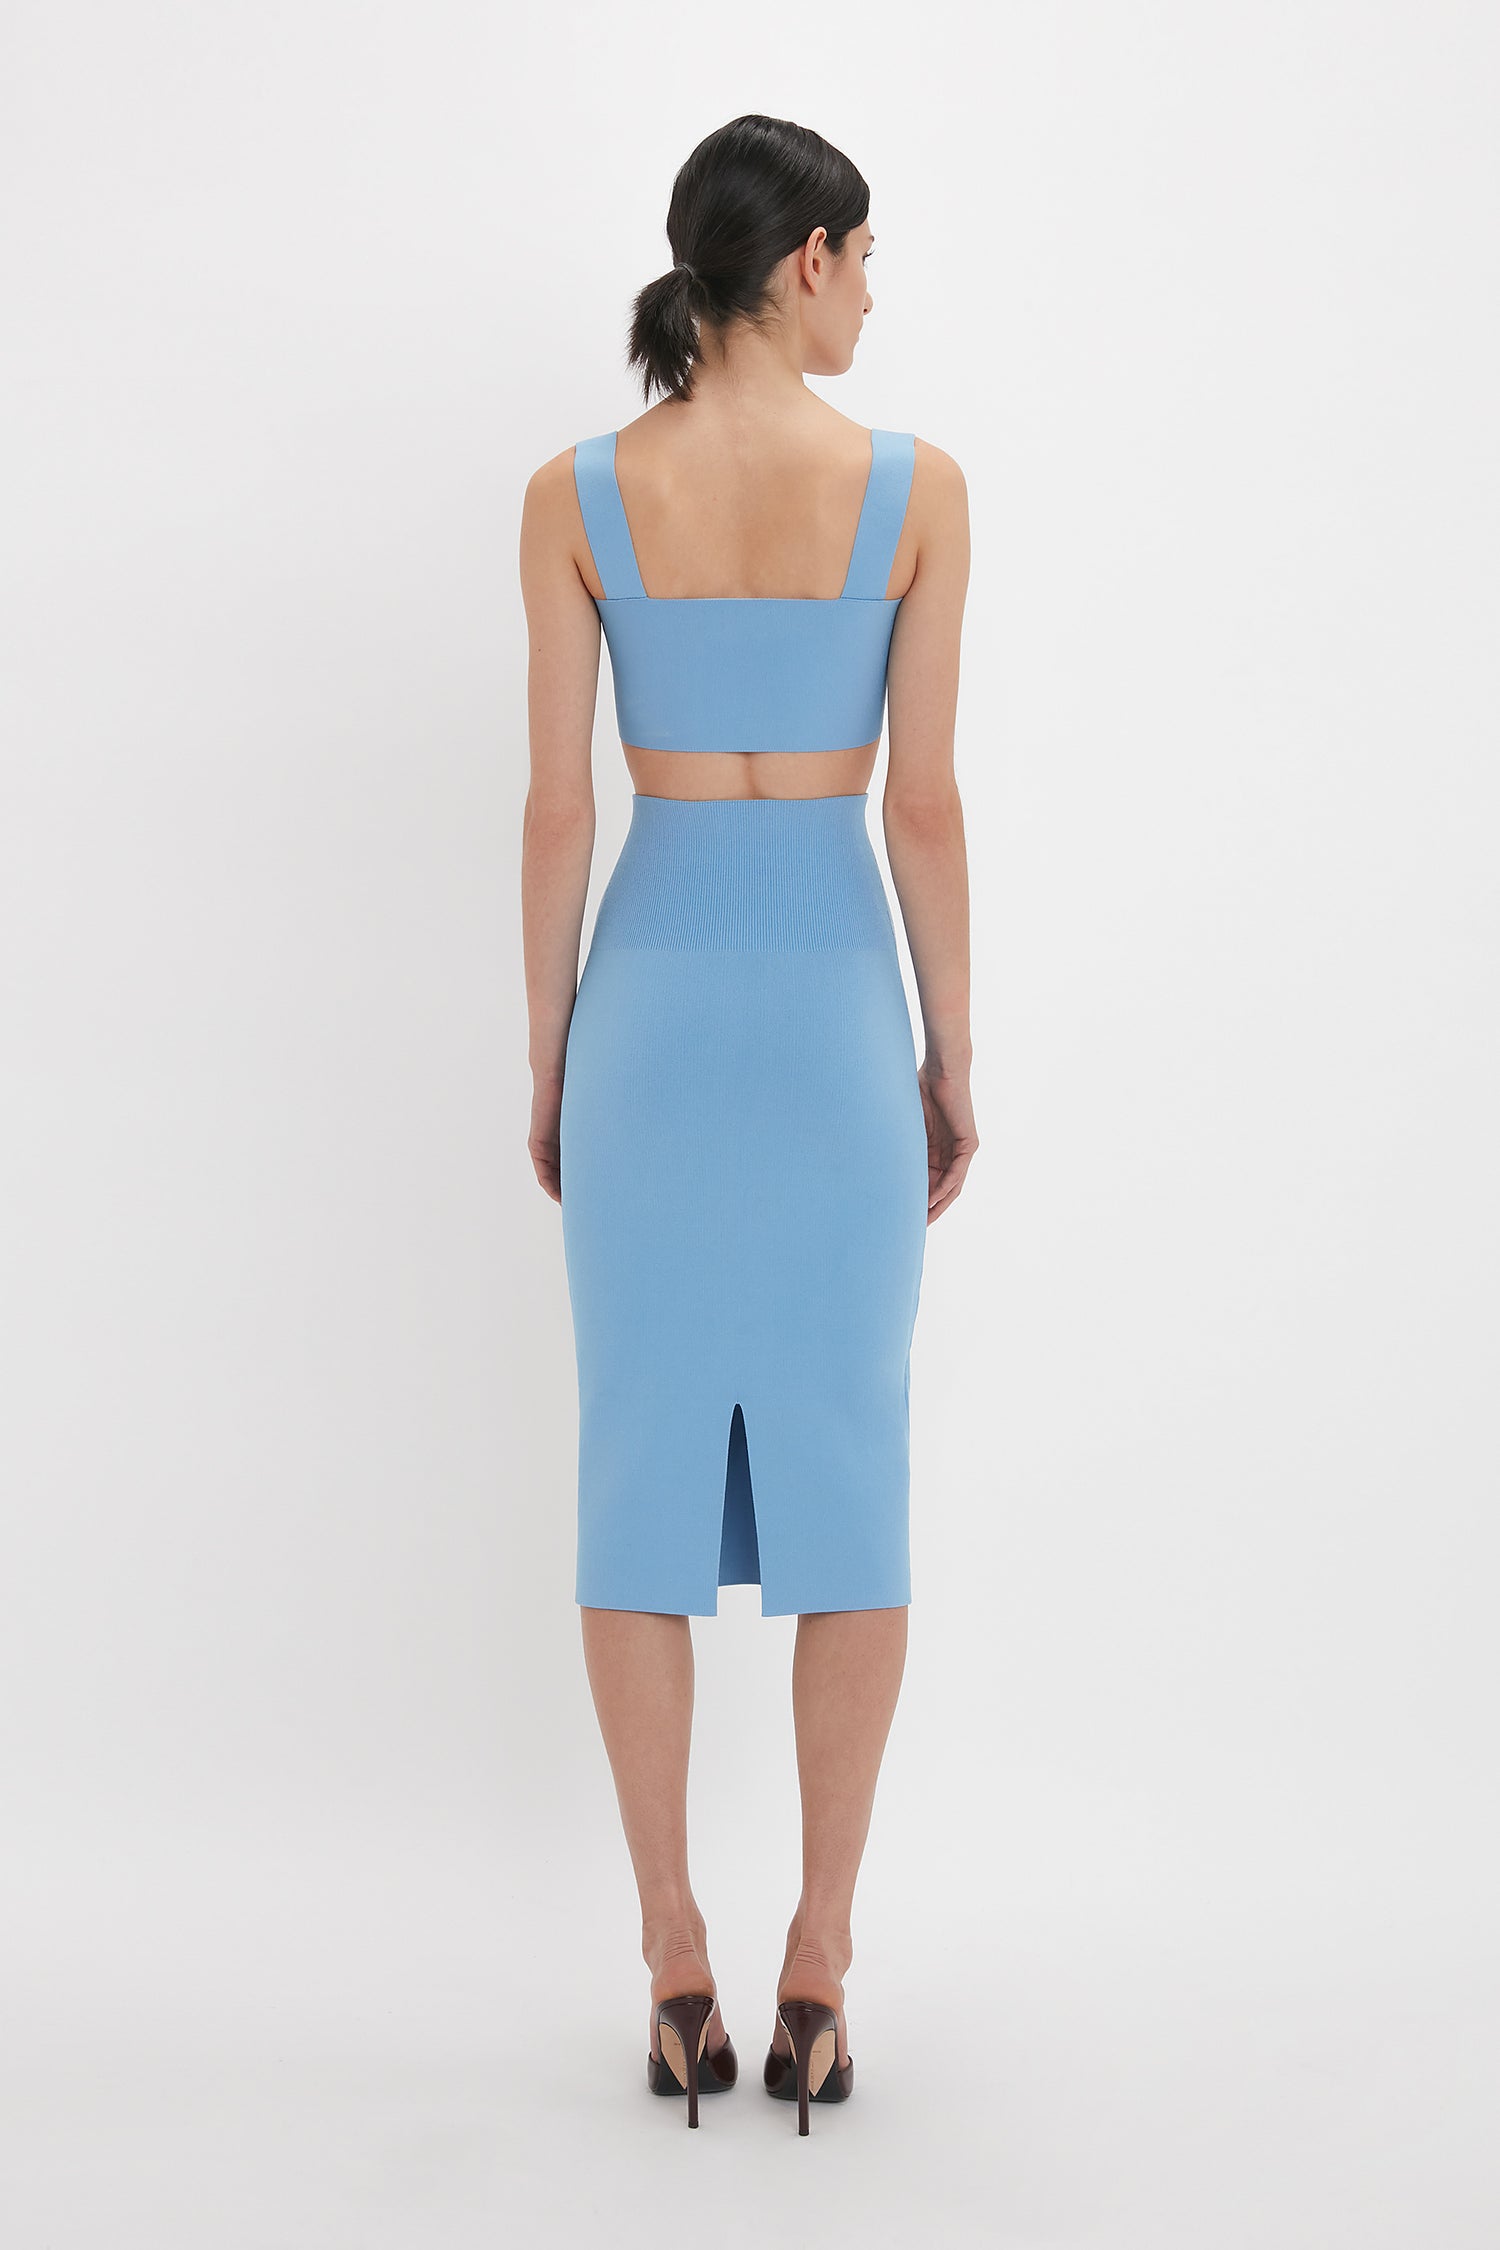 A person stands facing away, wearing a Strap Bandeau Top In Marina by Victoria Beckham with a cutout back and high heels, accentuating an ultra form-fitting silhouette.